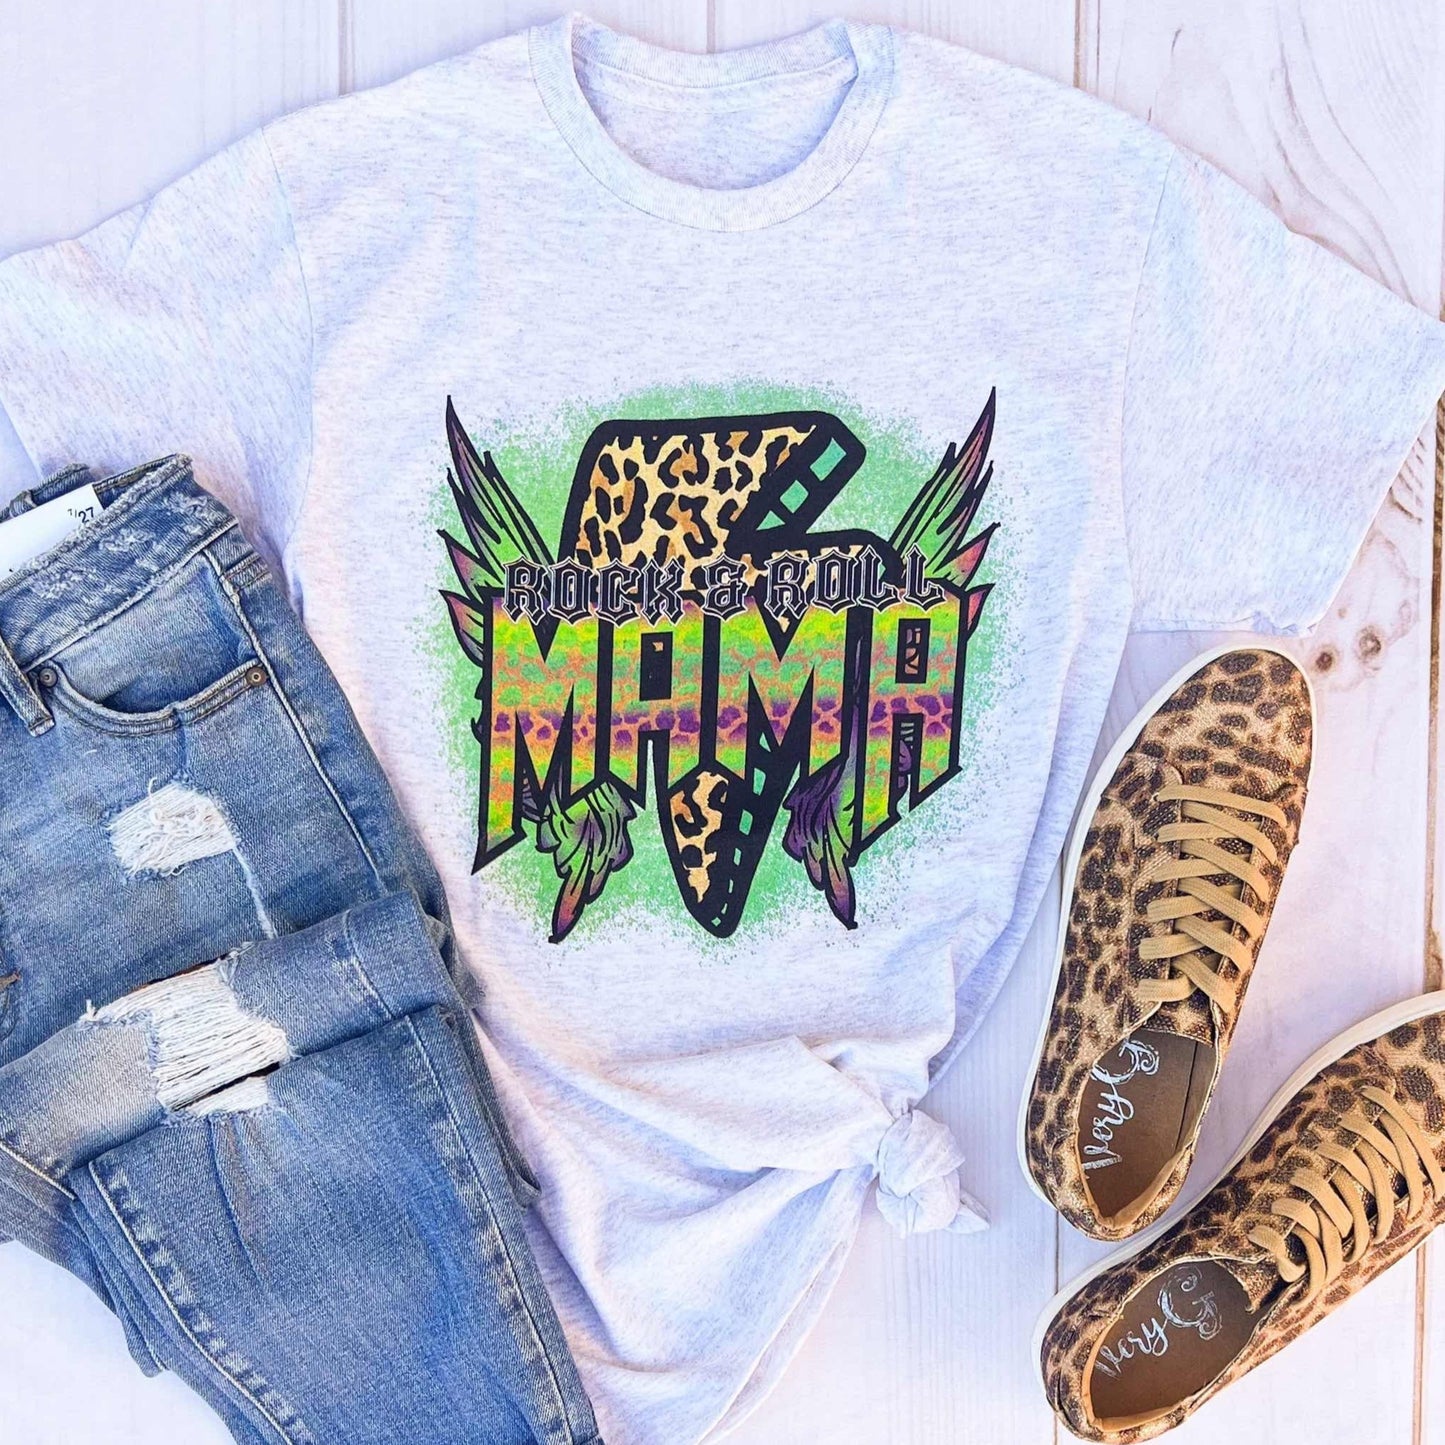 Envy Stylz Boutique Women - Apparel - Shirts - T-Shirts Rock & Roll Leopard Mama Graphic Tee